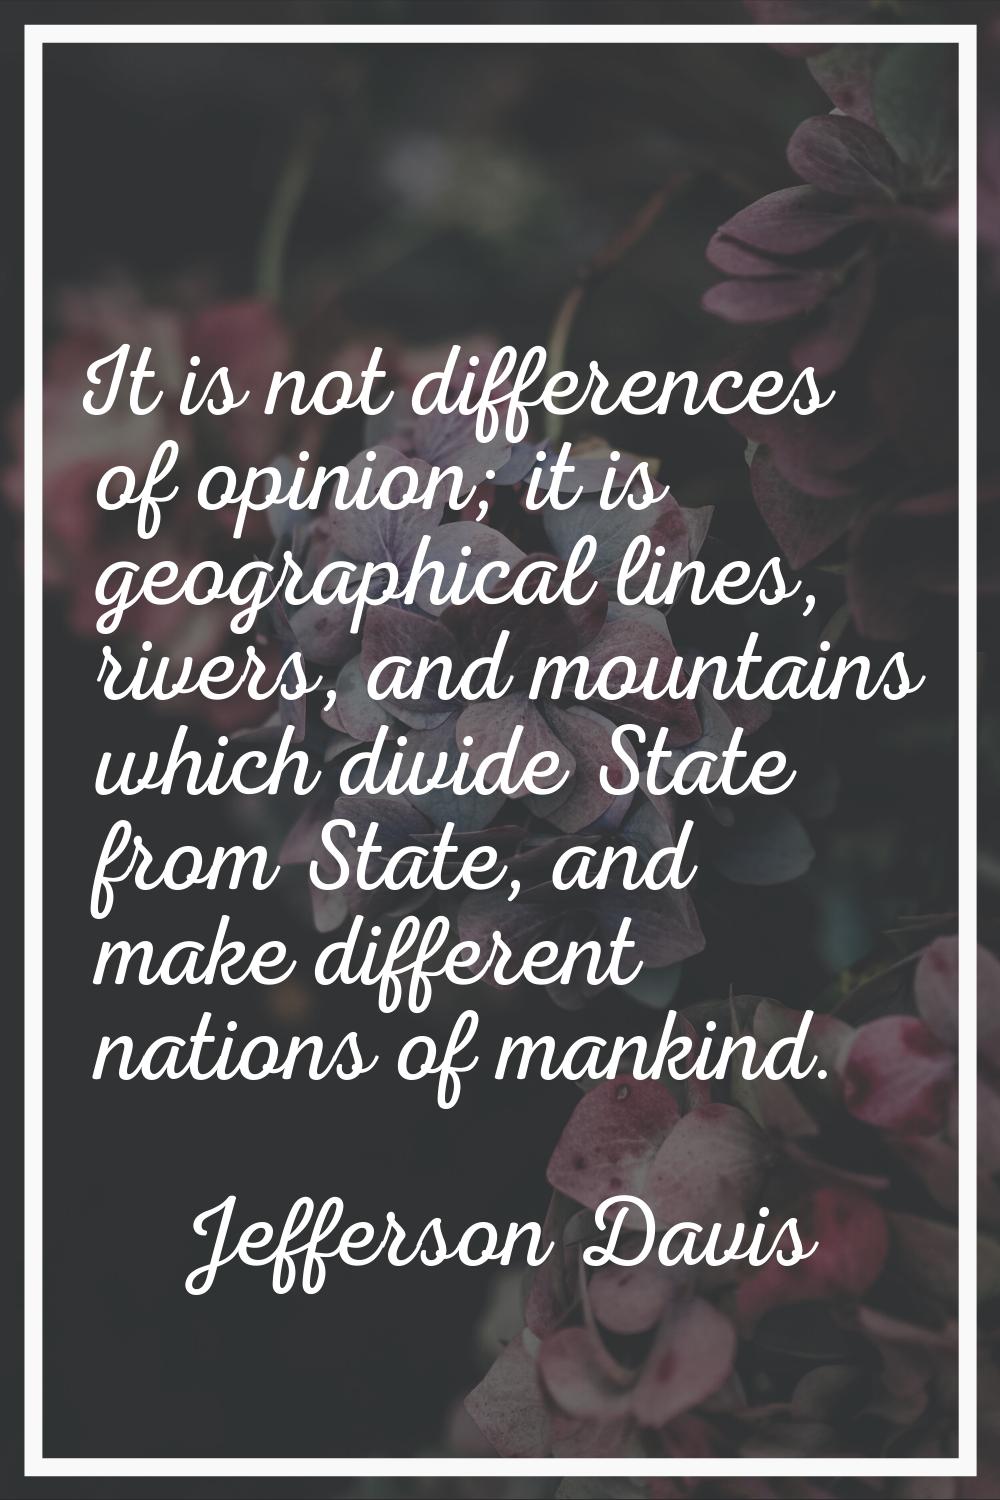 It is not differences of opinion; it is geographical lines, rivers, and mountains which divide Stat